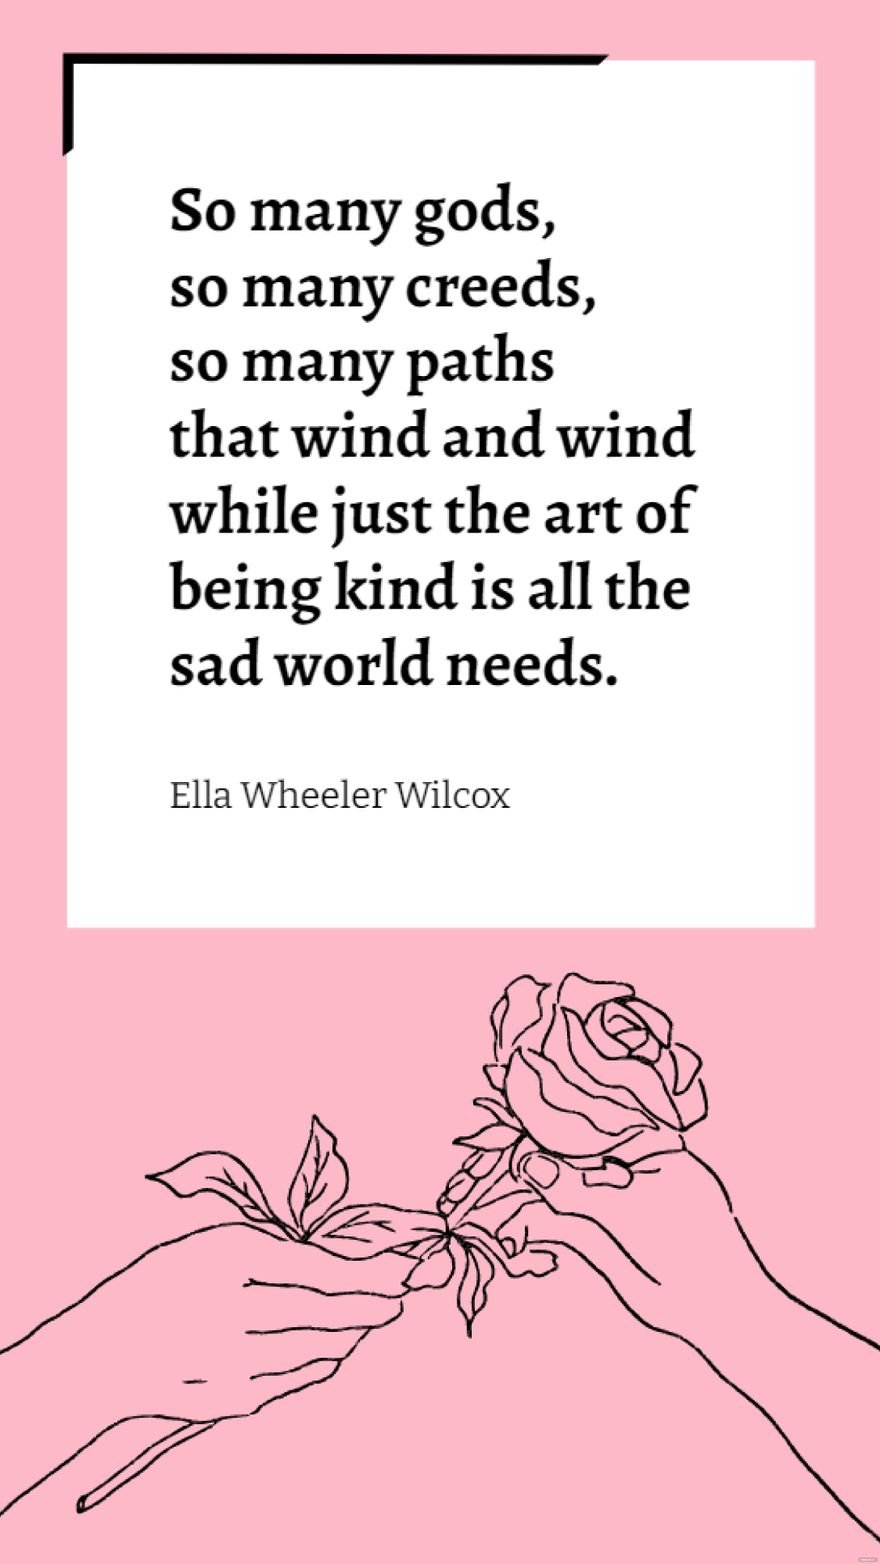 Ella Wheeler Wilcox - So many gods, so many creeds, so many paths that wind and wind while just the art of being kind is all the sad world needs.